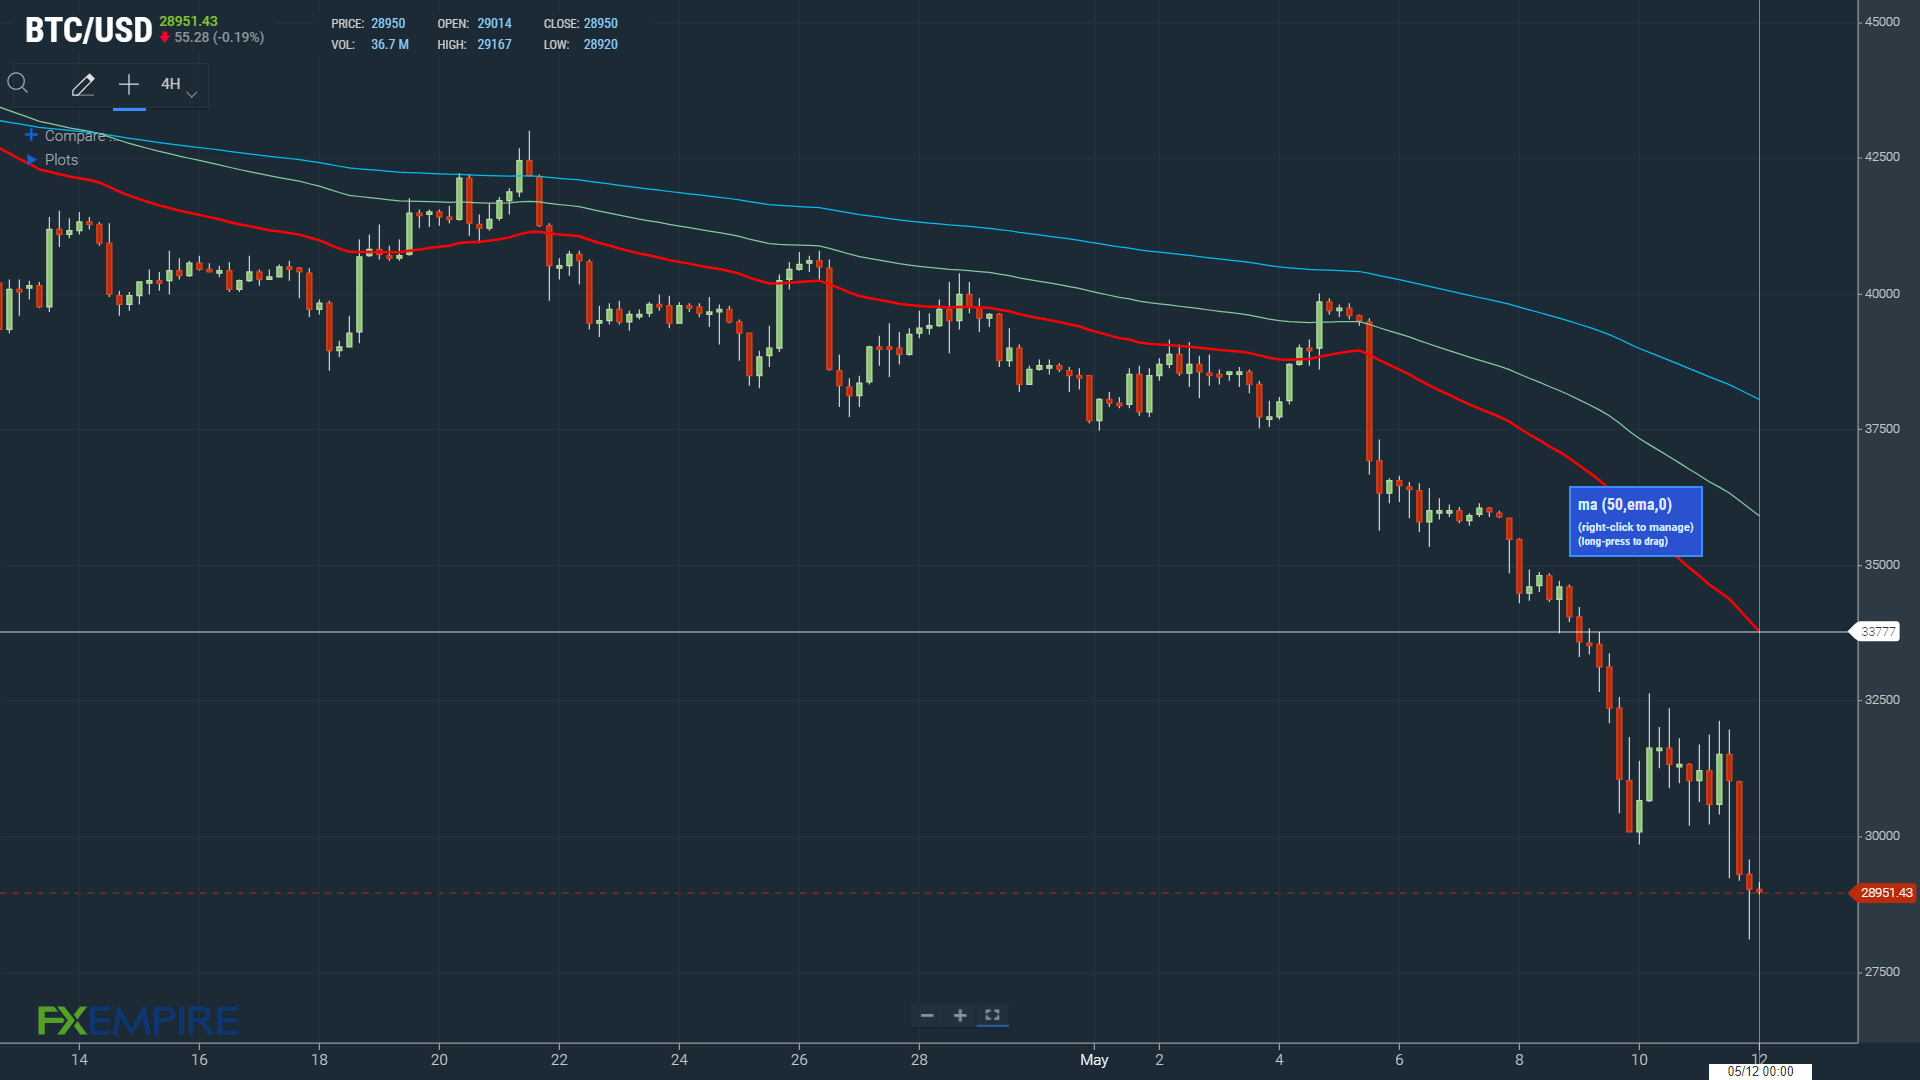 Signals are bearish, with BTC below the 50-day EMA.